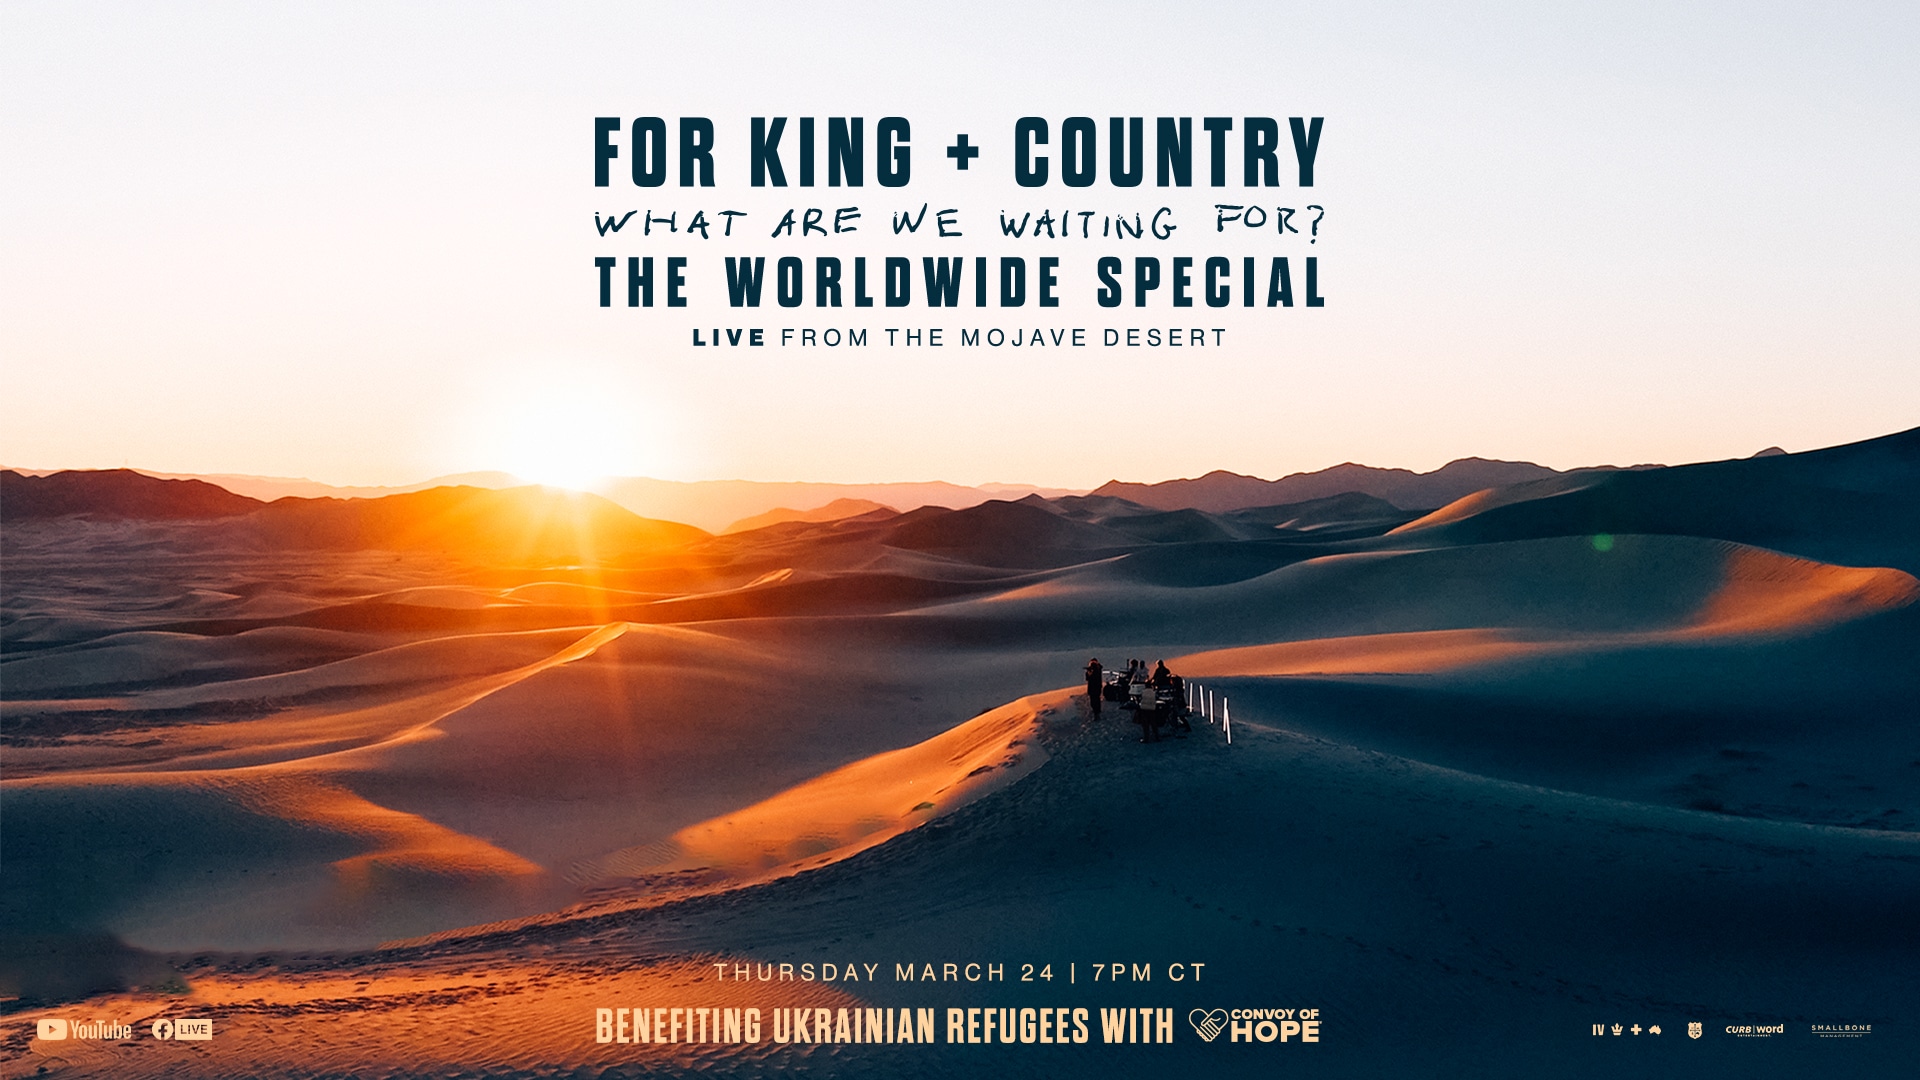 For King + Country YouTube Concert